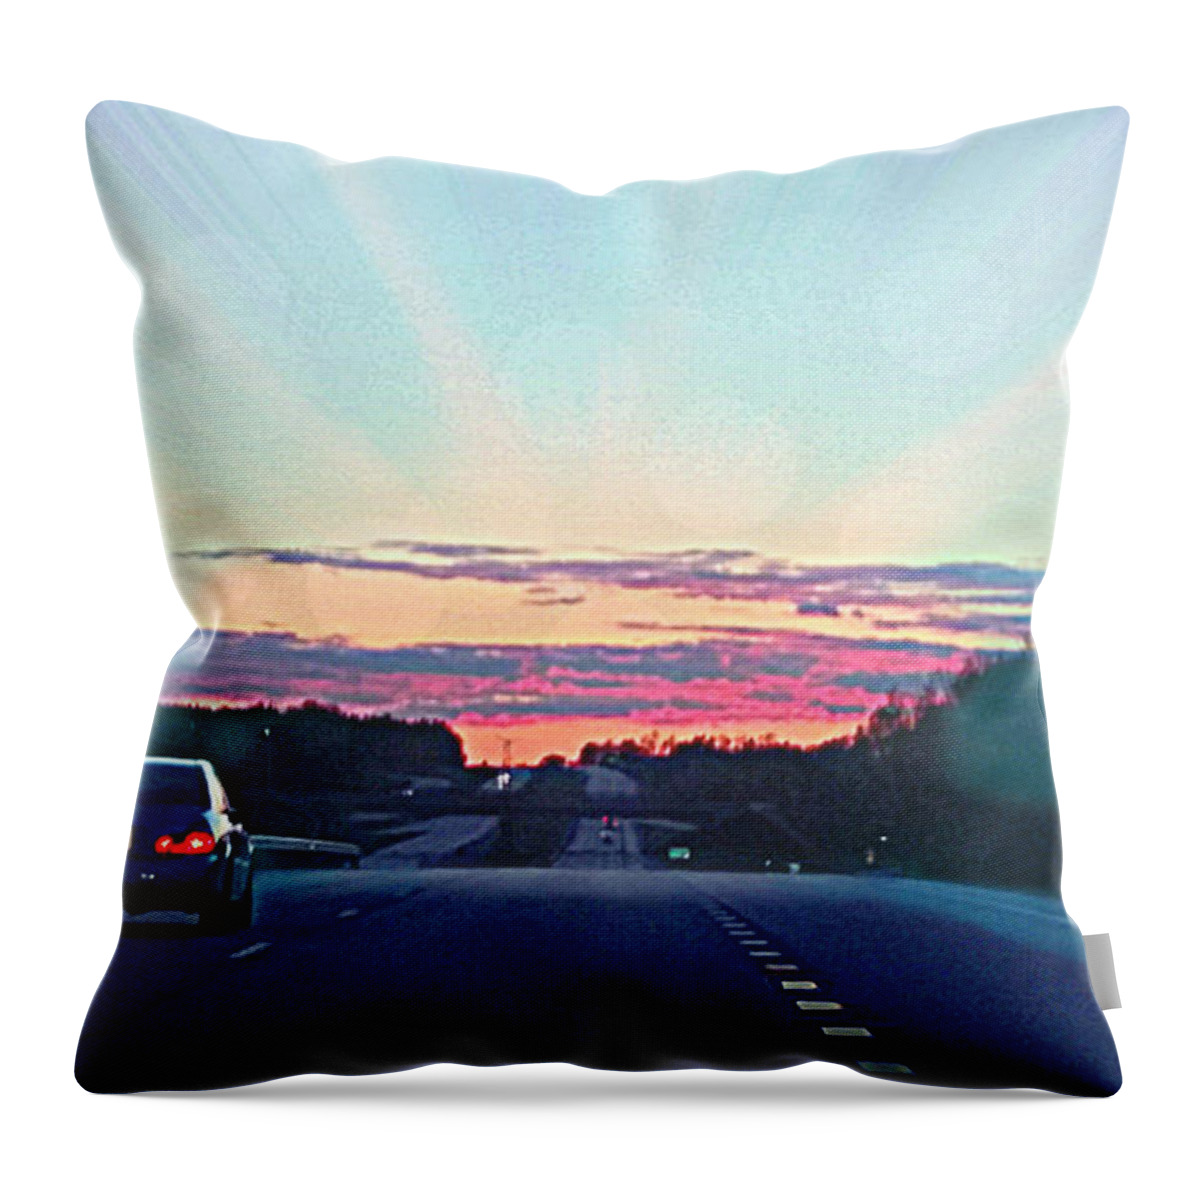 Pink Clouds Throw Pillow featuring the mixed media Chasing Pink Clouds by Diamante Lavendar